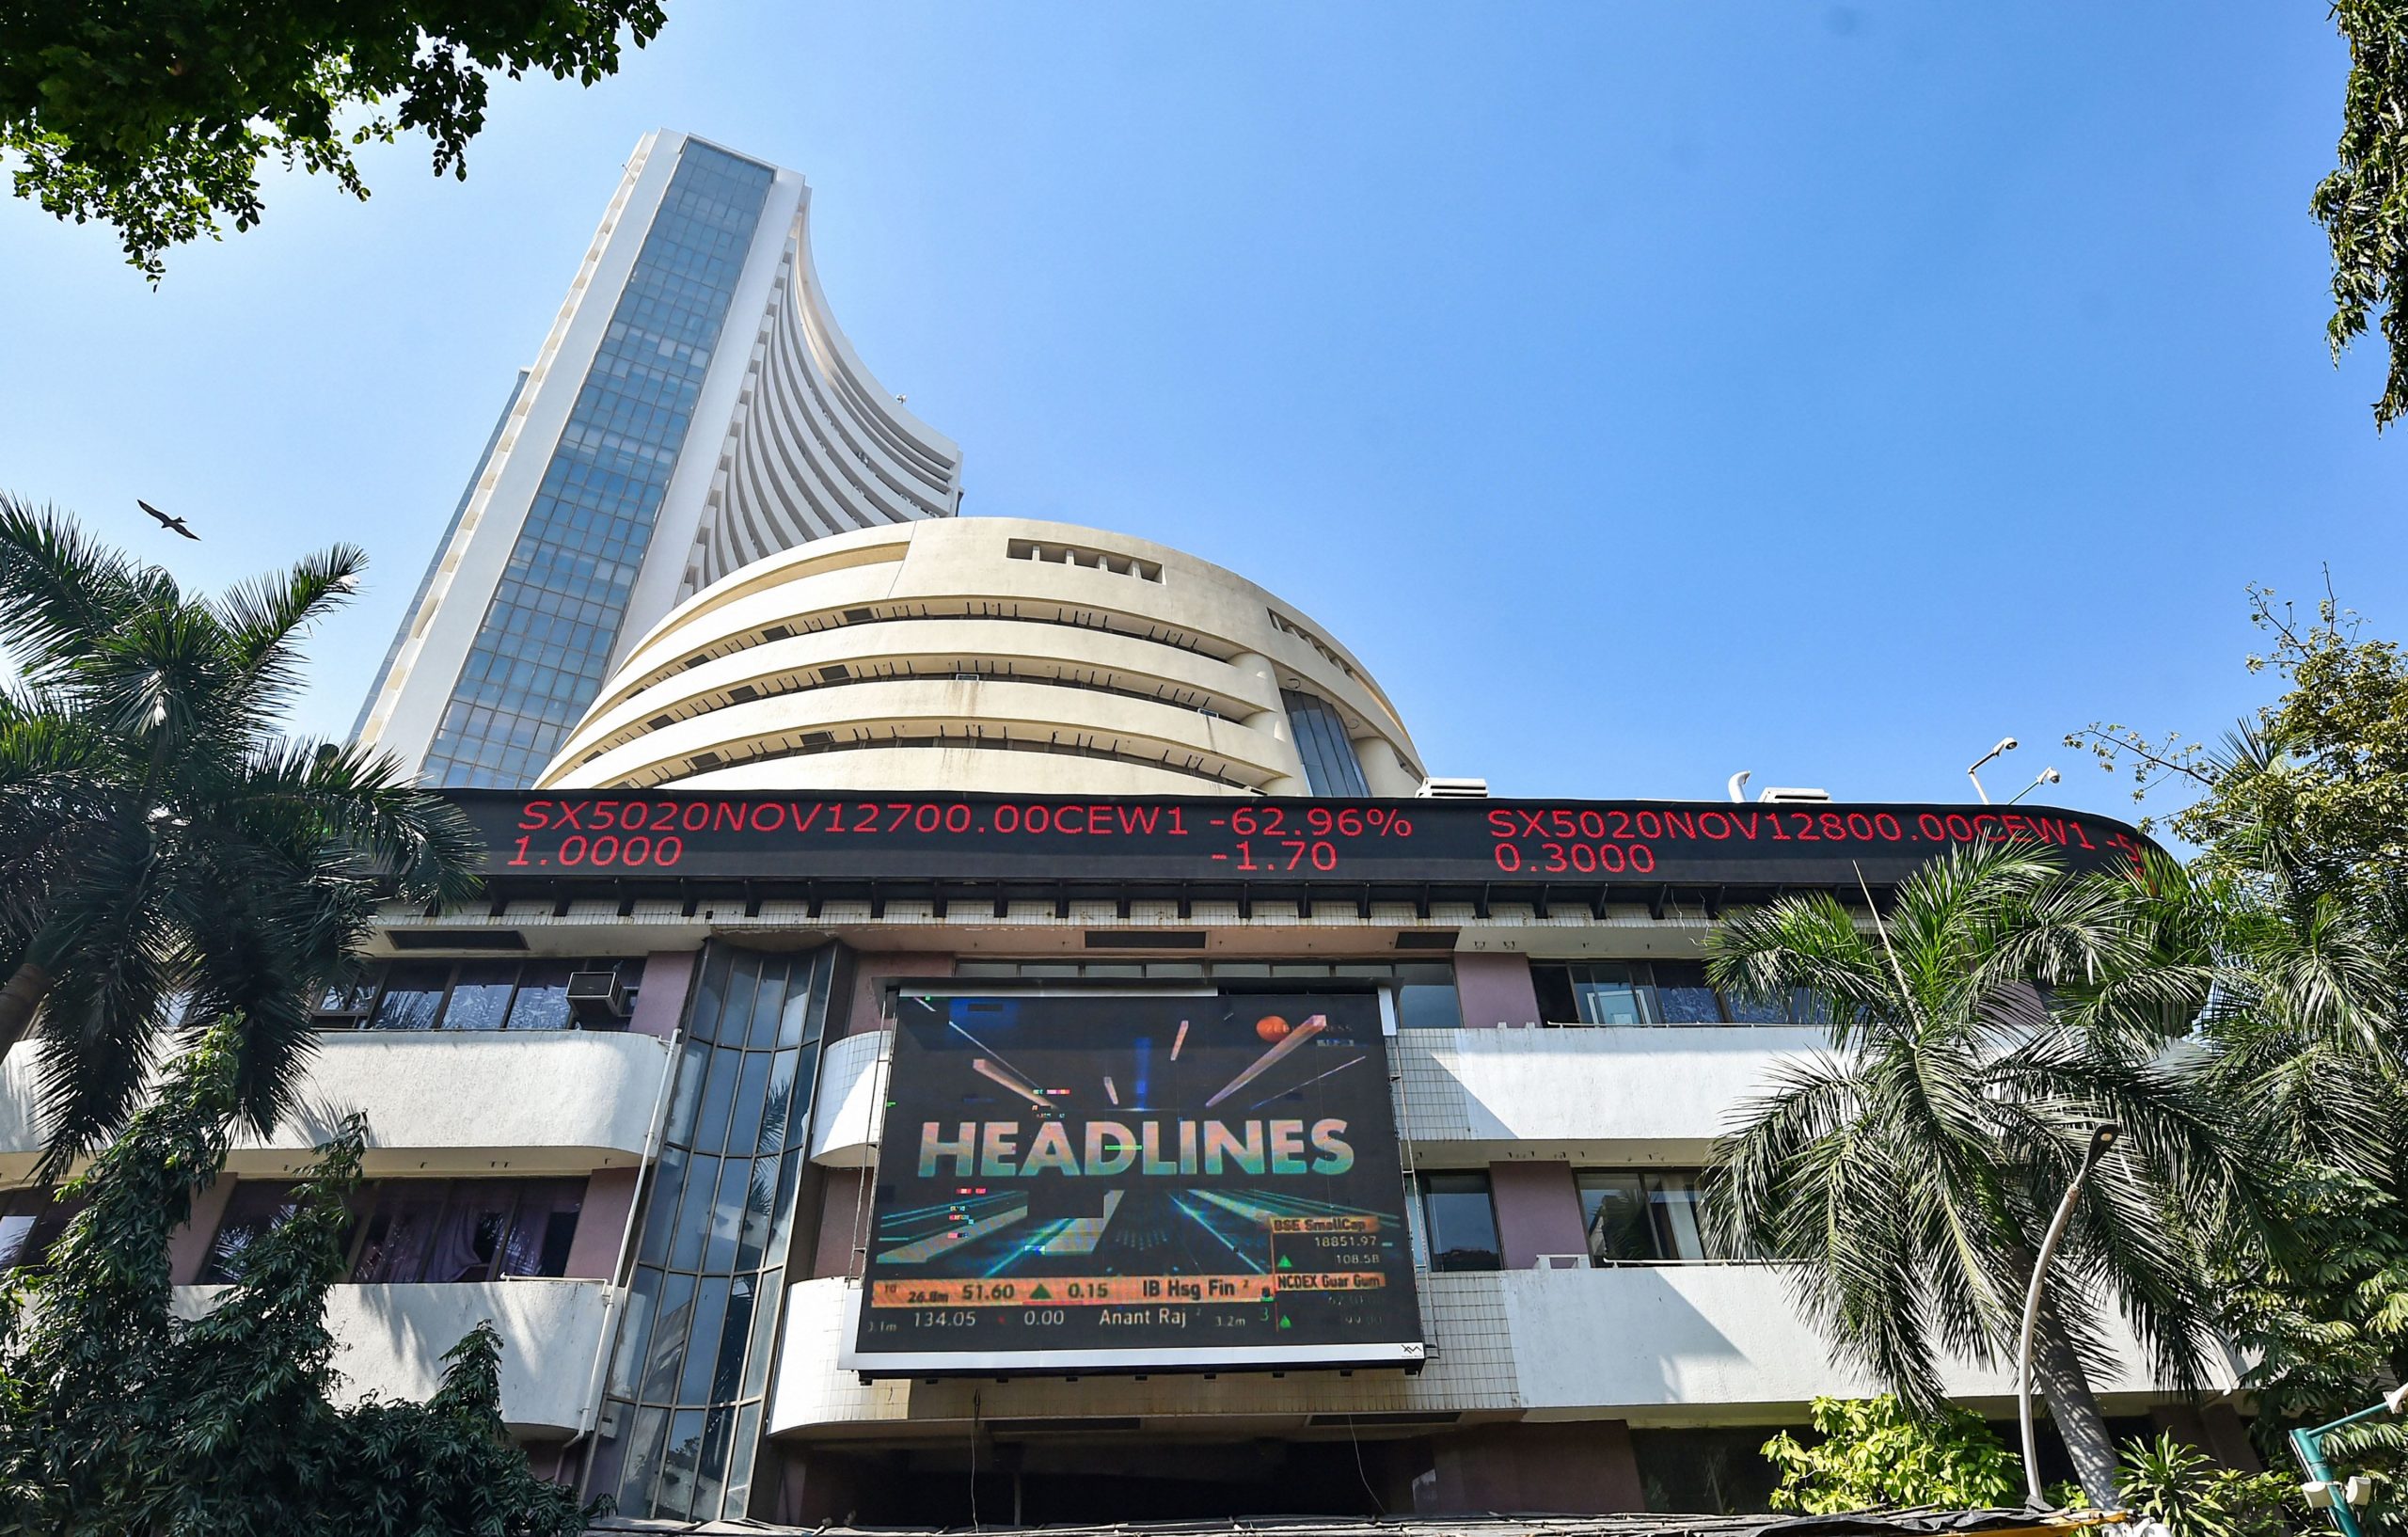 Trending Stocks: Adani, Kitex, HCL, Websol and others in news today